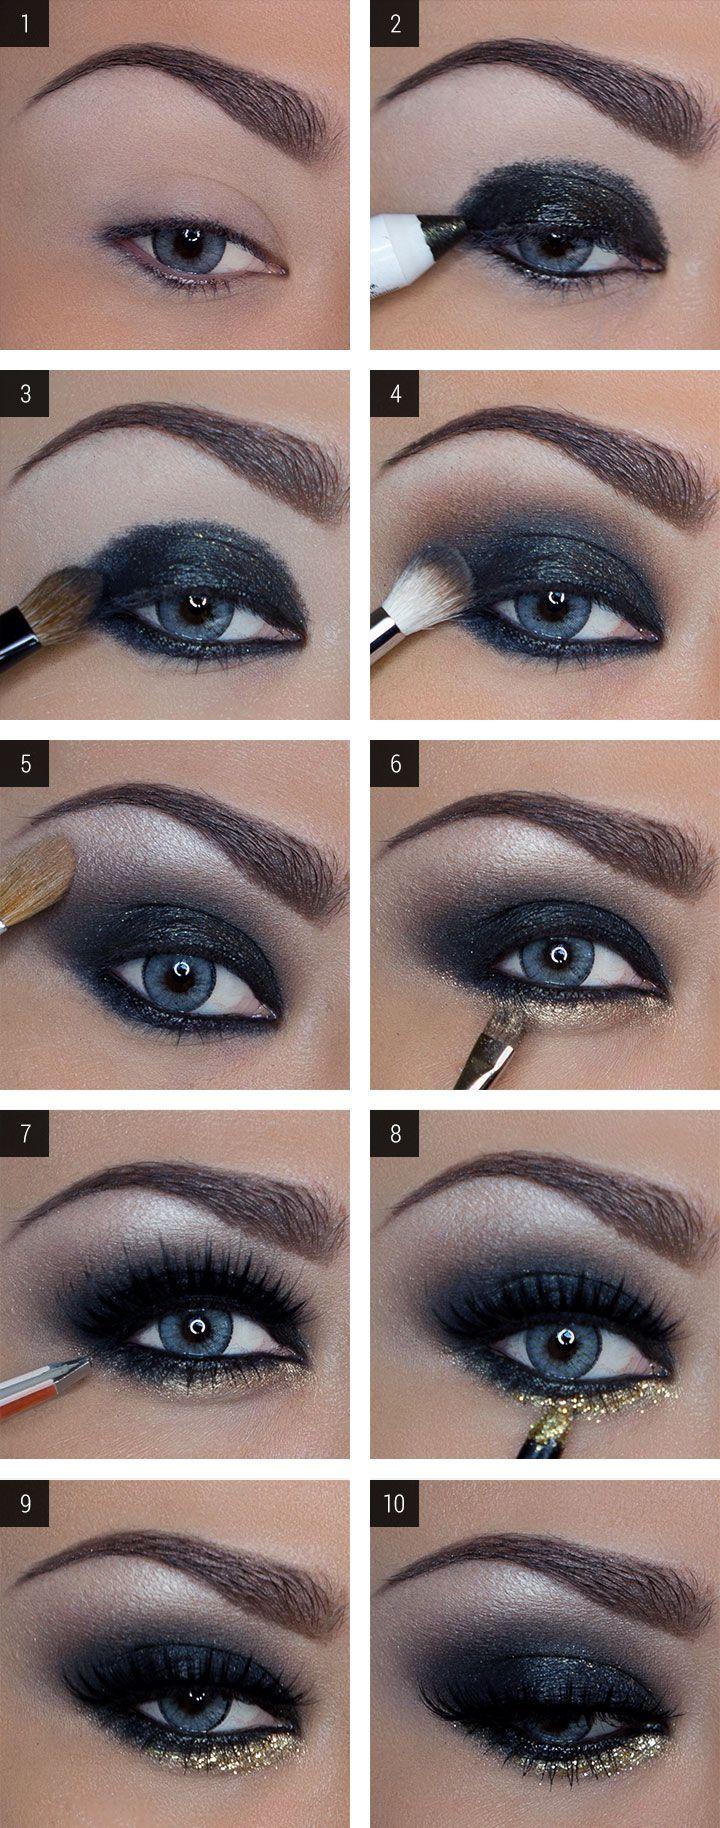 Mariage -  maquillage